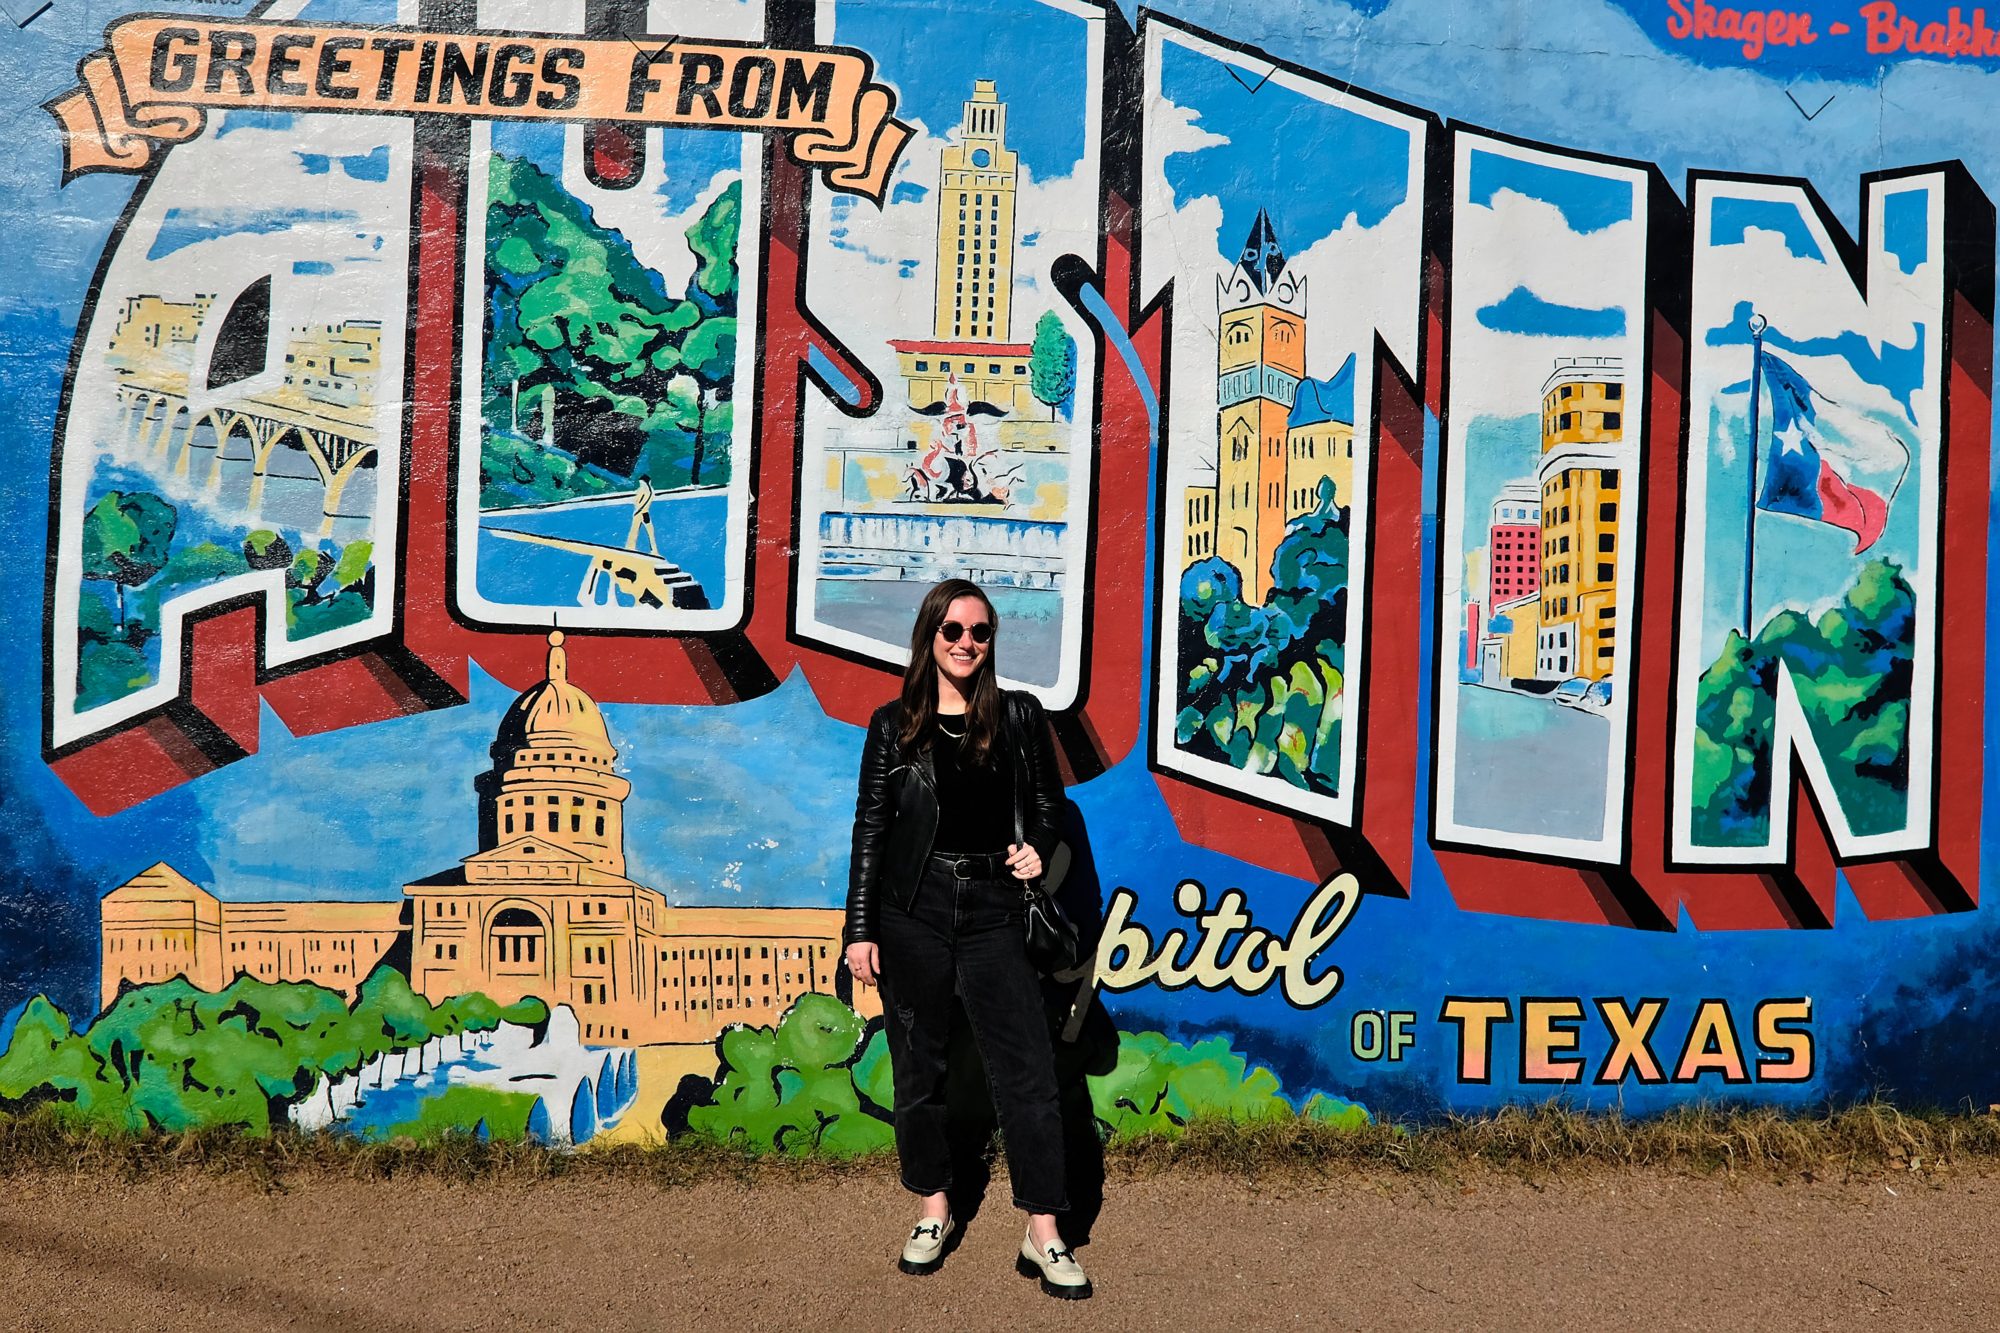 Alyssa stands in front of the Greetings from Austin Mural